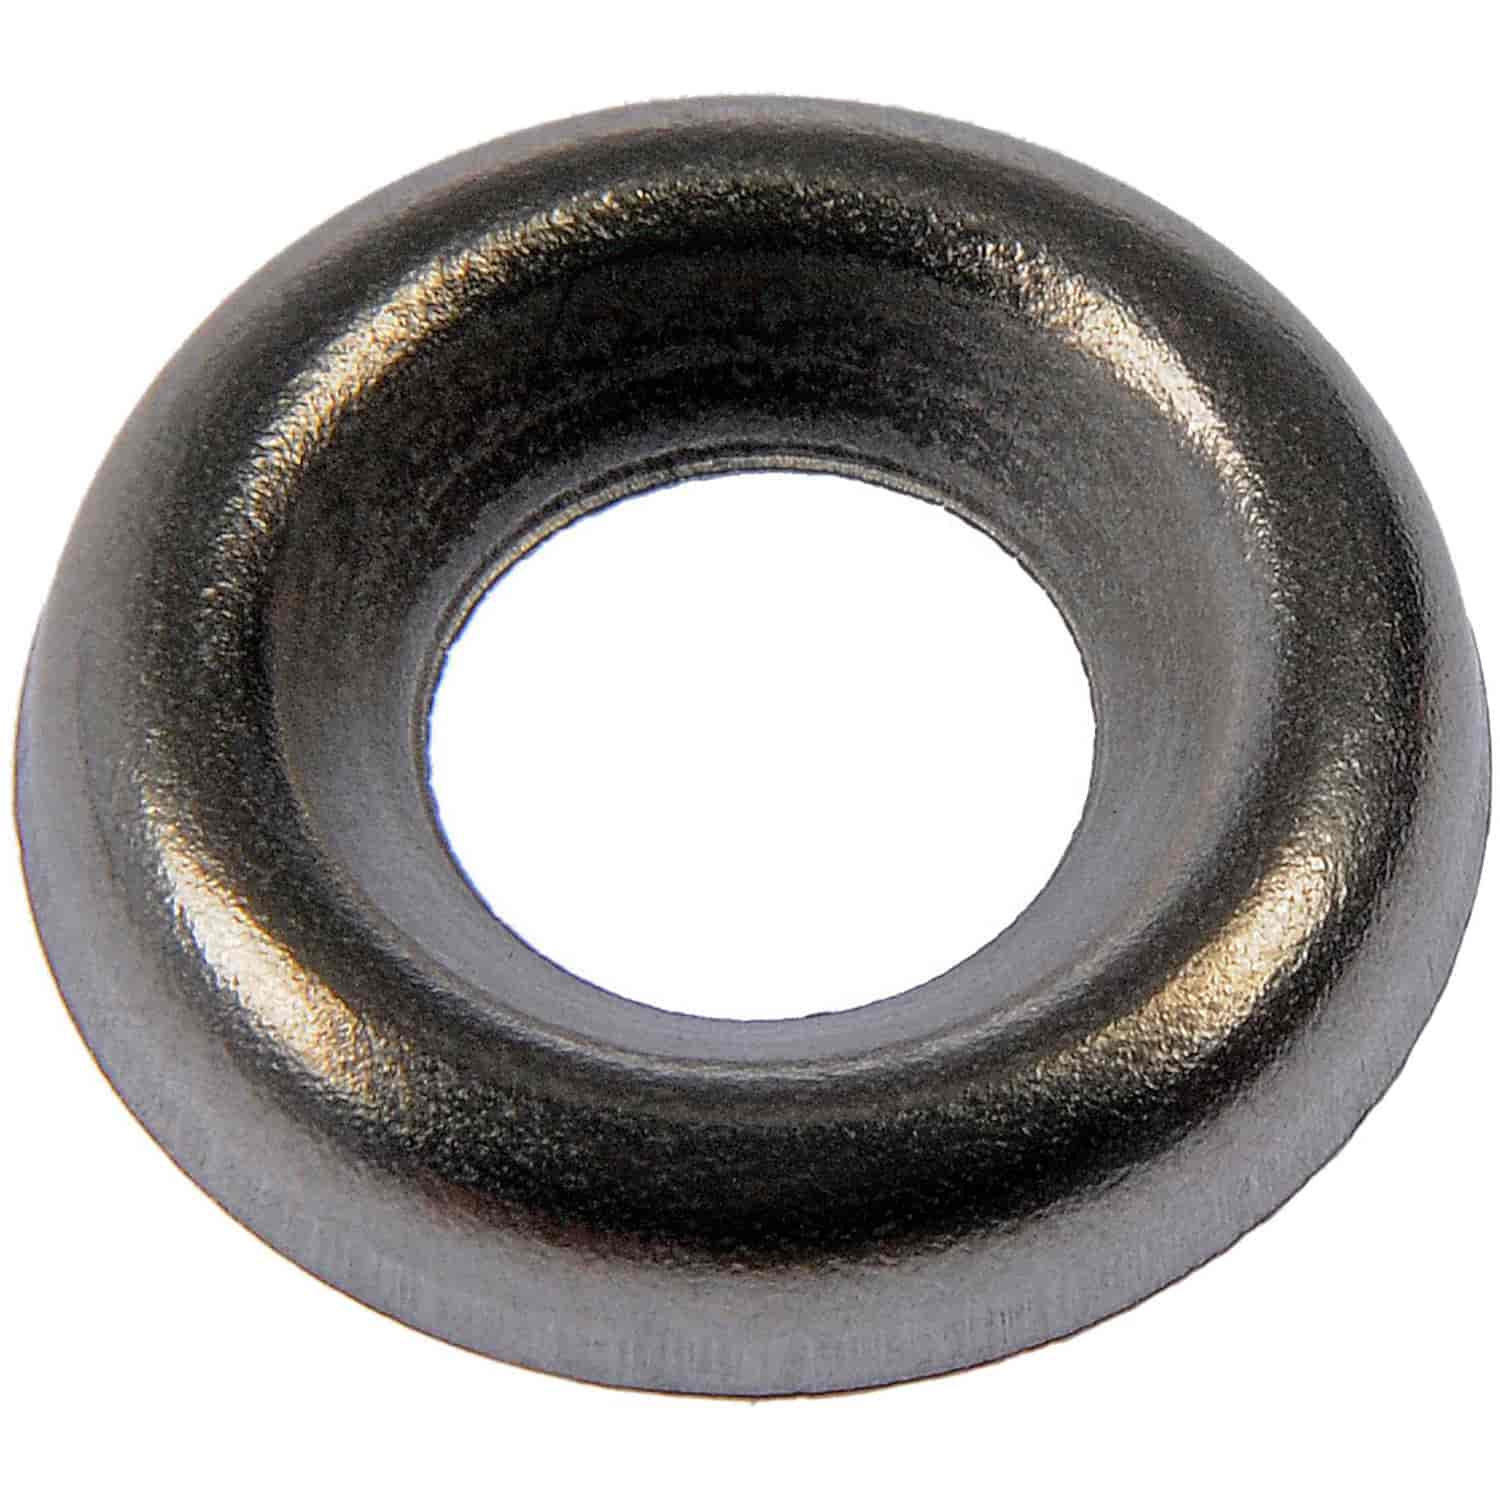 Finshing Washer-Stainless Steel-Countersunk- Size No. 10